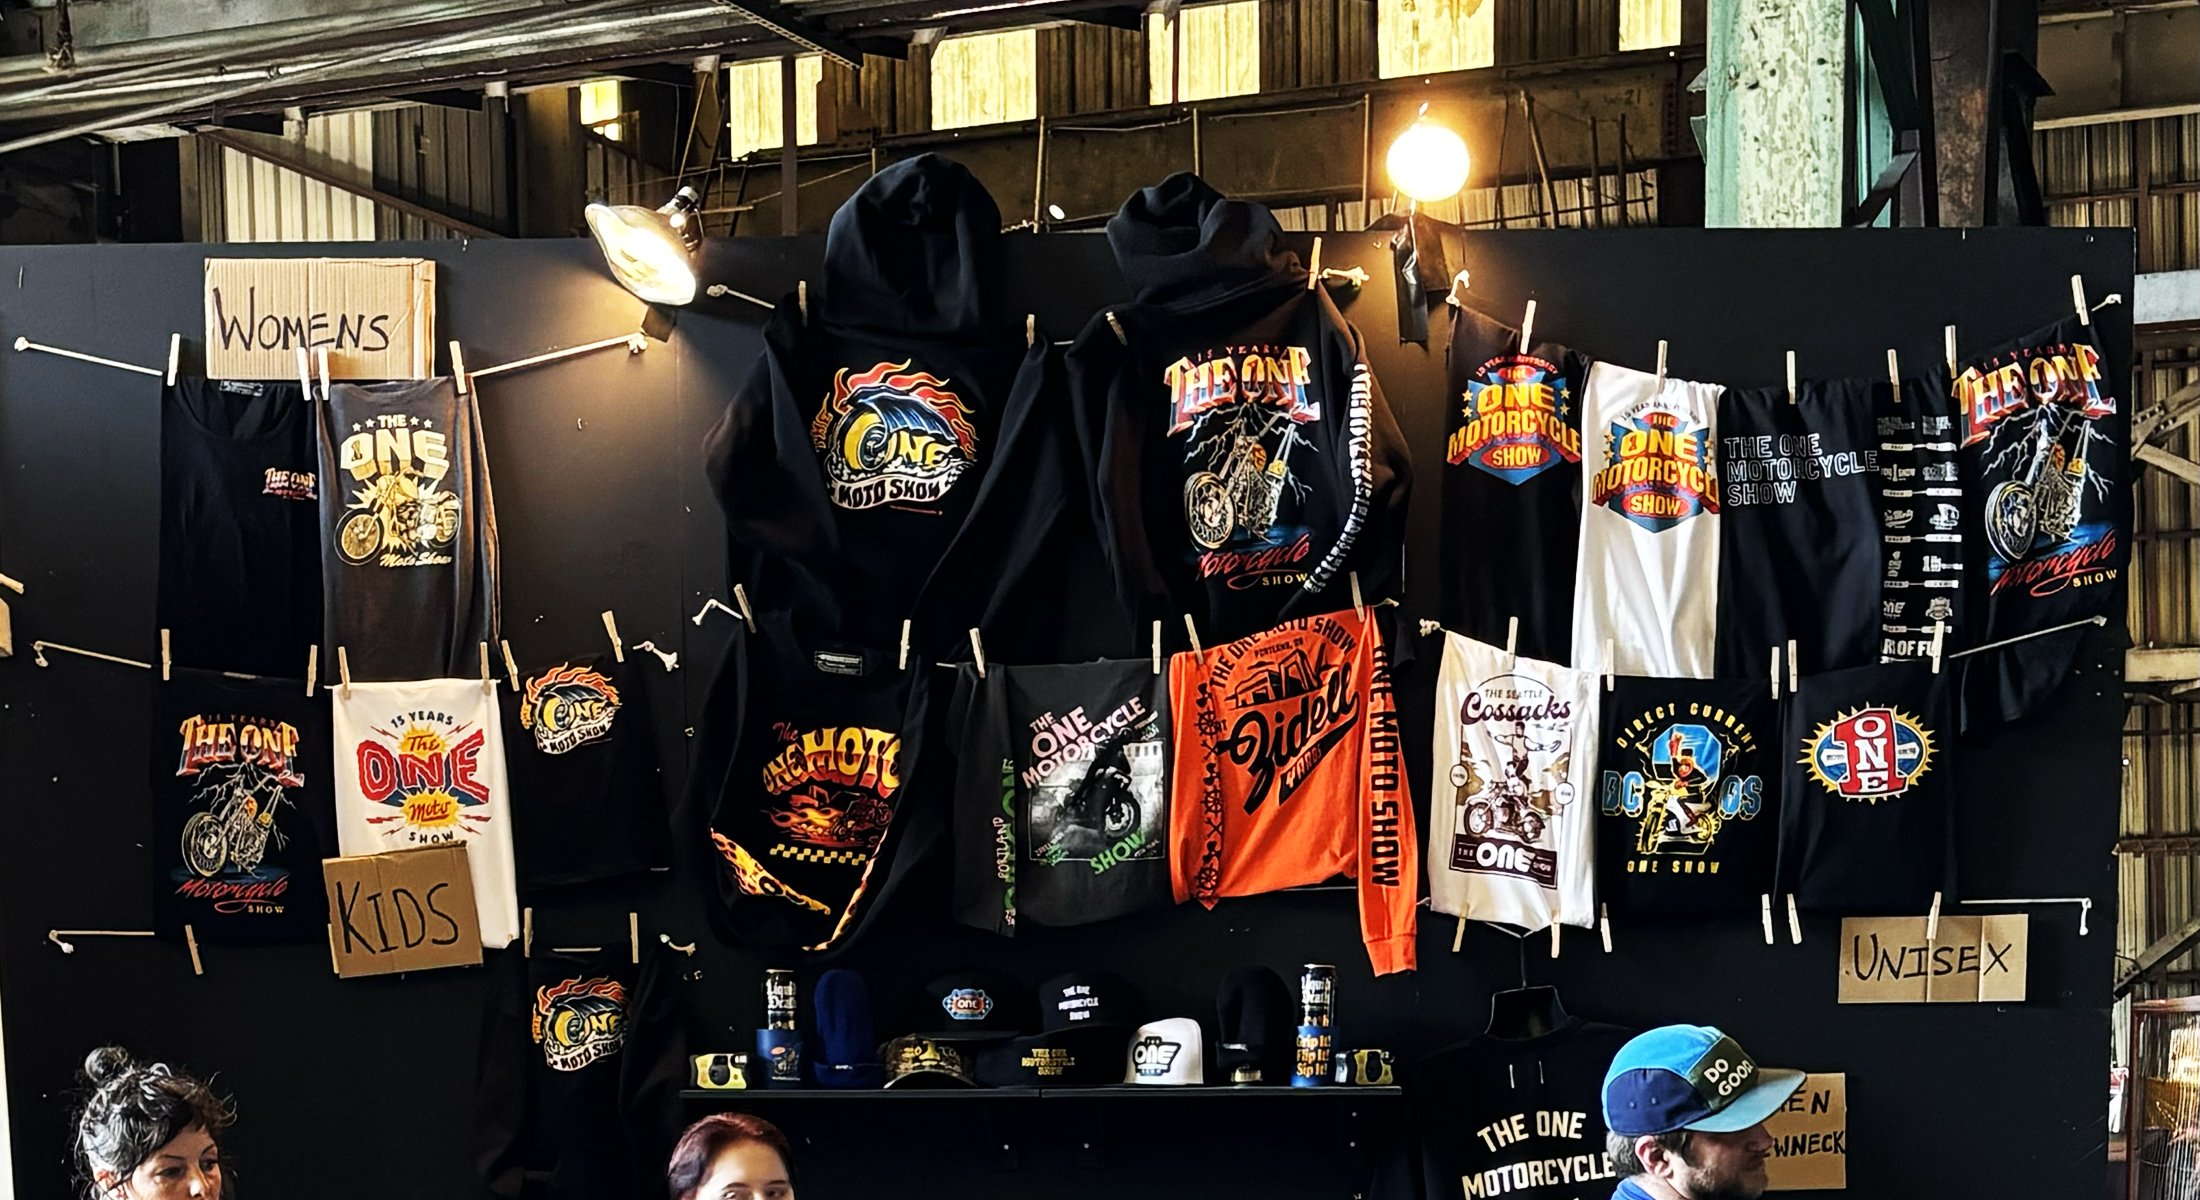 The One Moto Show Merch table